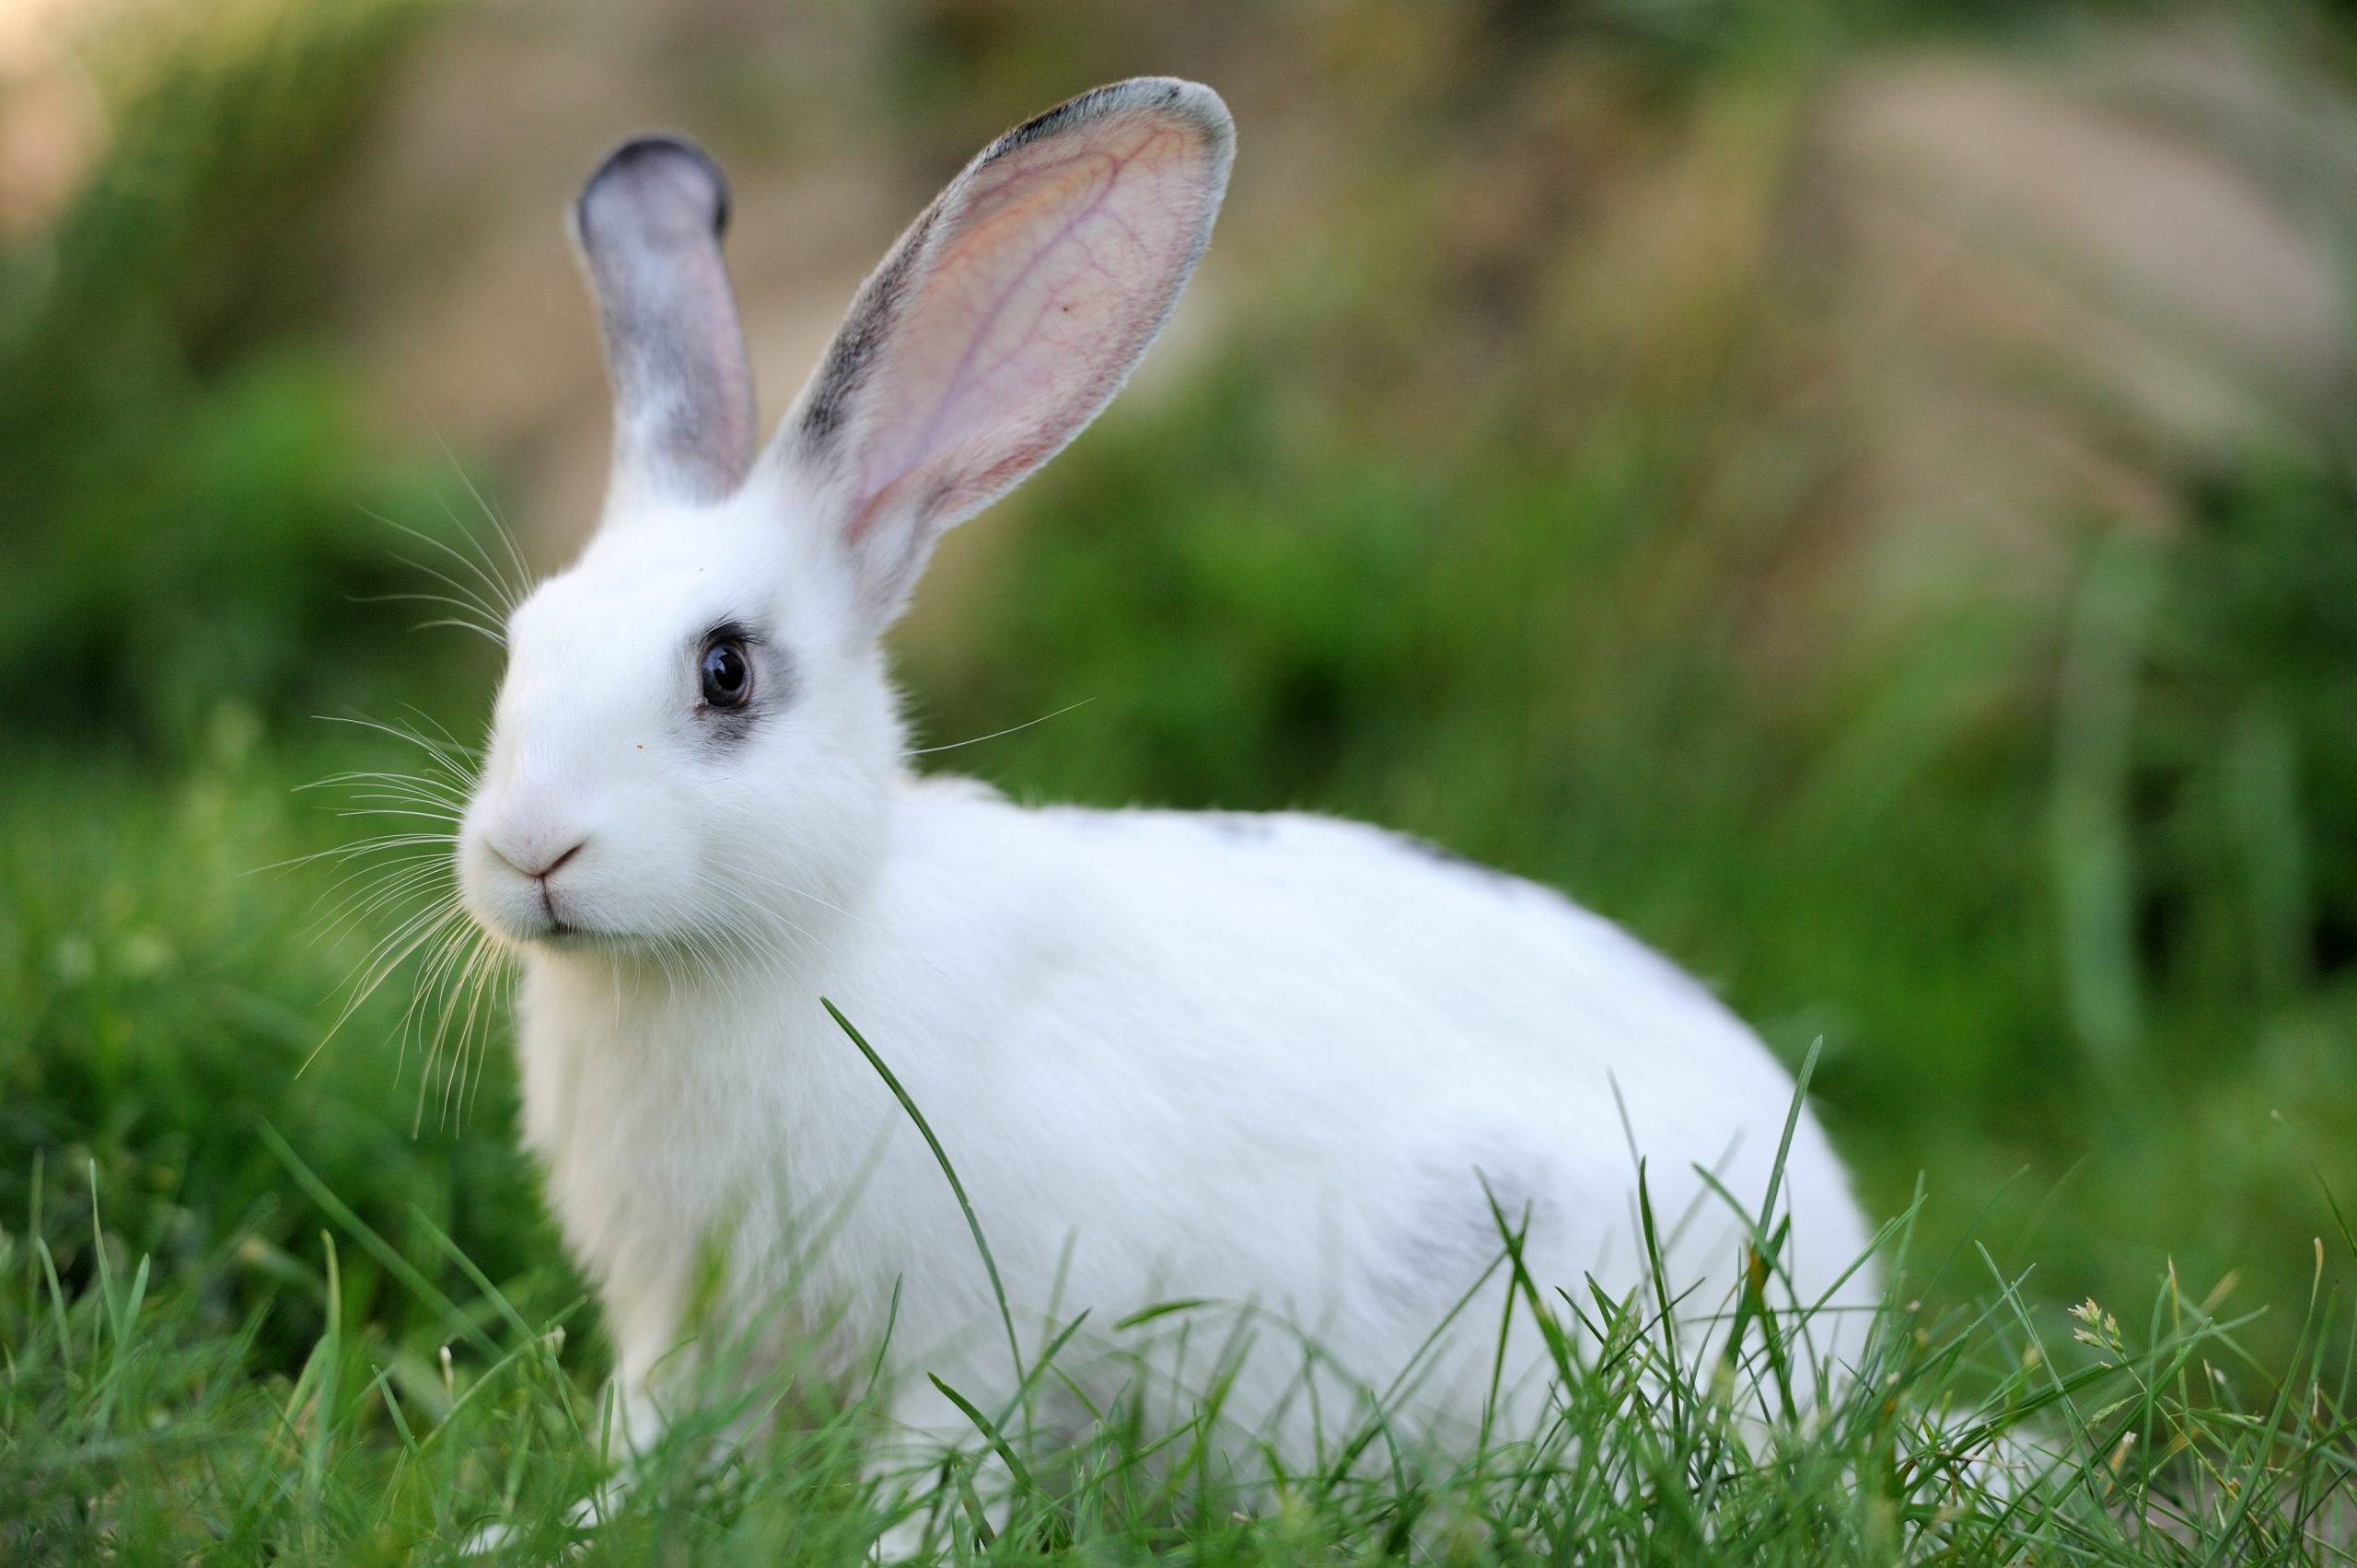 Rabbits, Kittens, Rabbits, PlusVet Animal Health, Feed Additives, Feed Additives, Plant Extracts, Essential Oils, Phytobiotics, Phytochemicals, Phytogens, Replace Growth Promoting Antibiotics, Natural Products, Digestive Health